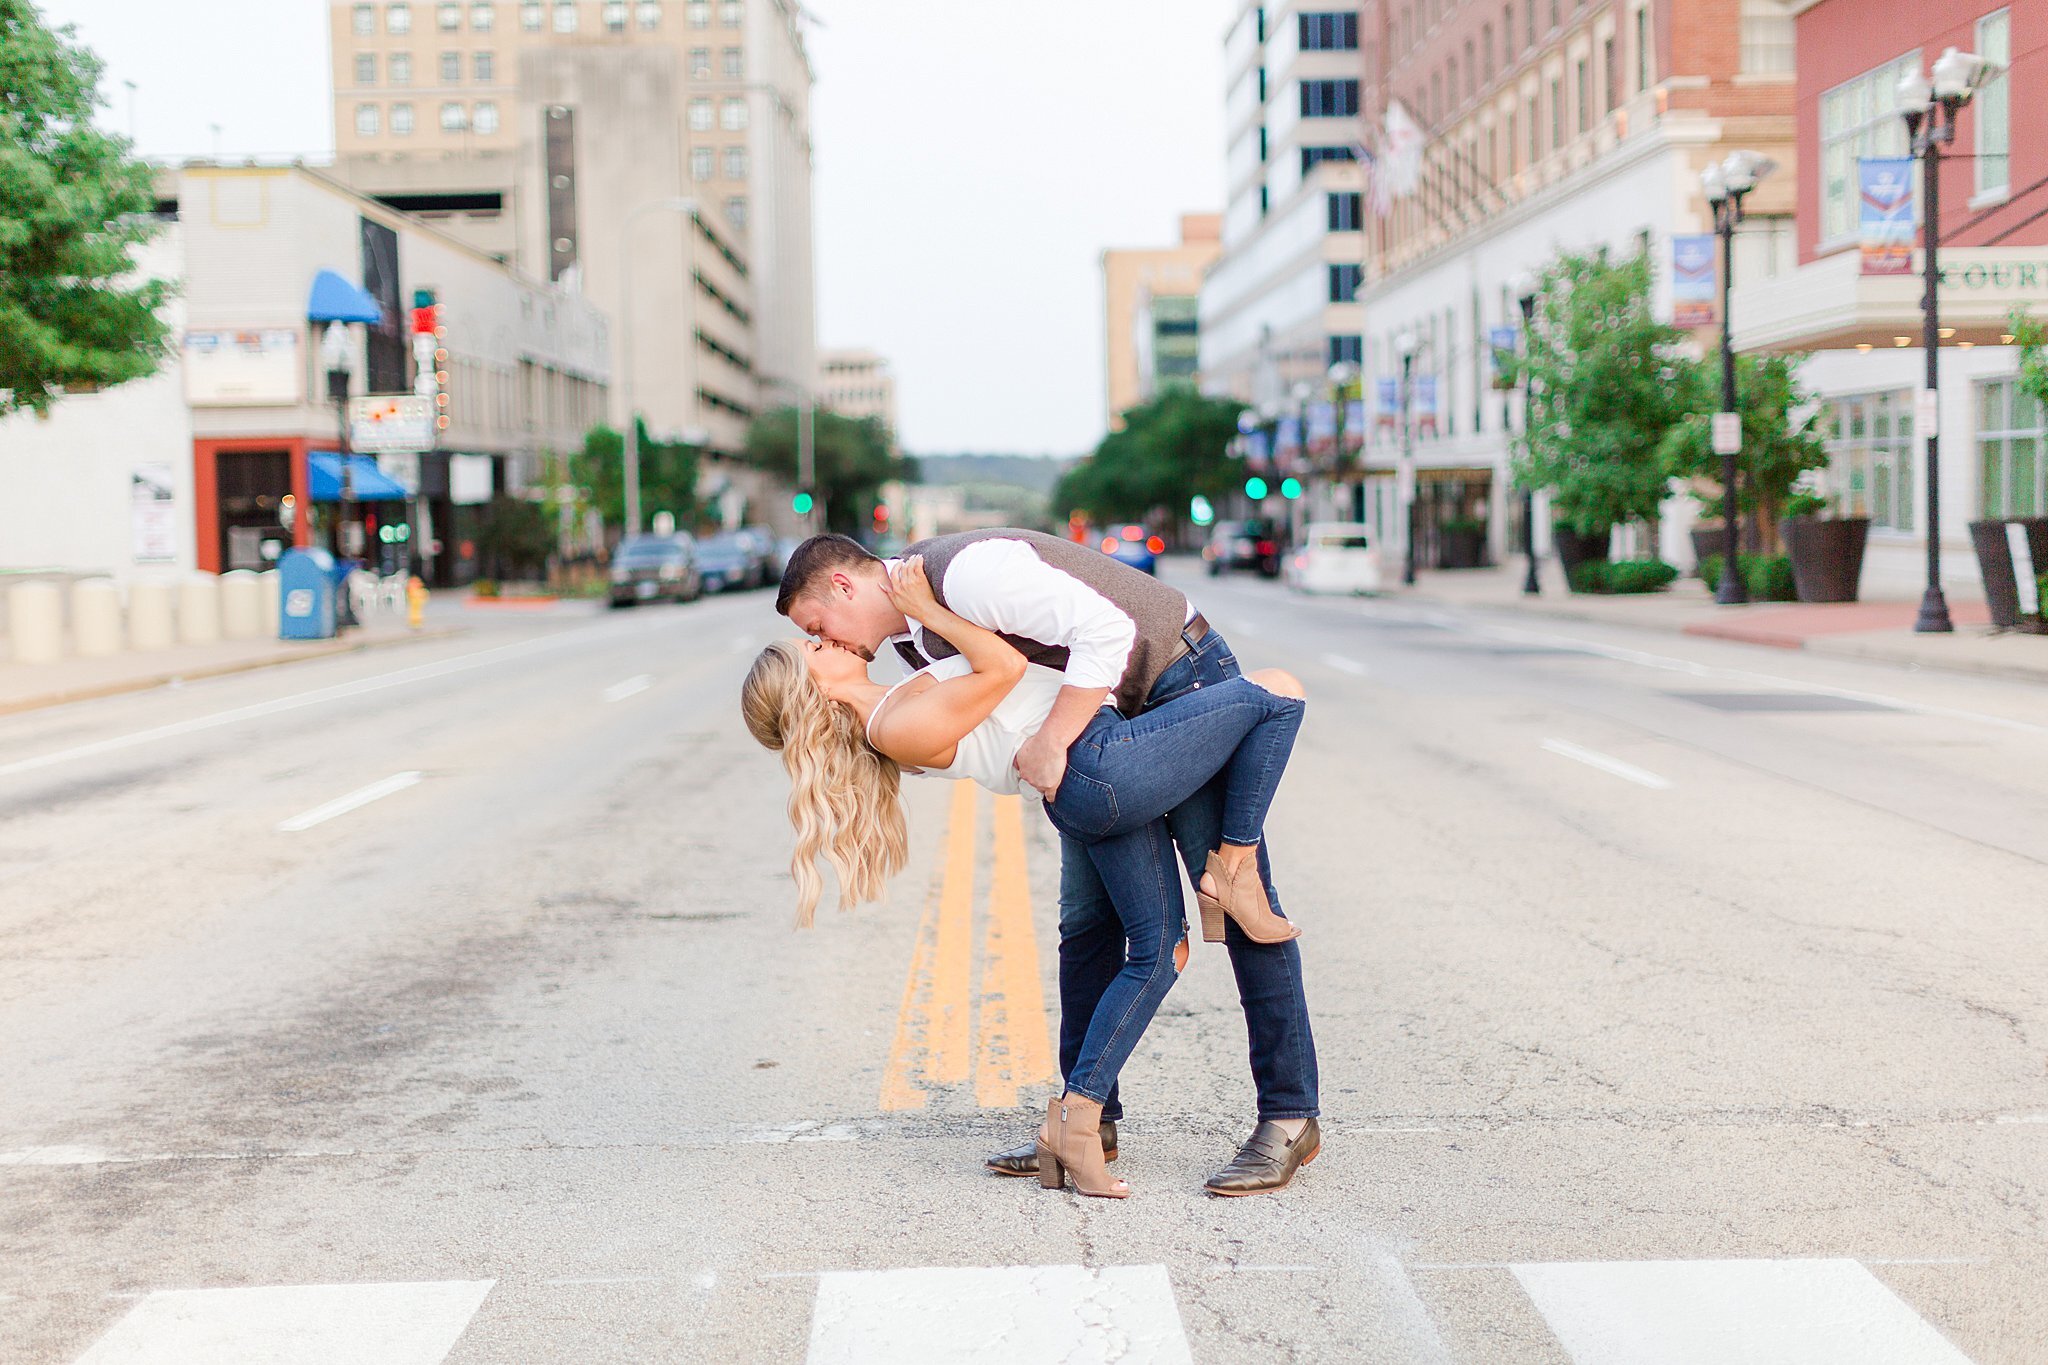 Peoria Rooftop Engagement Session